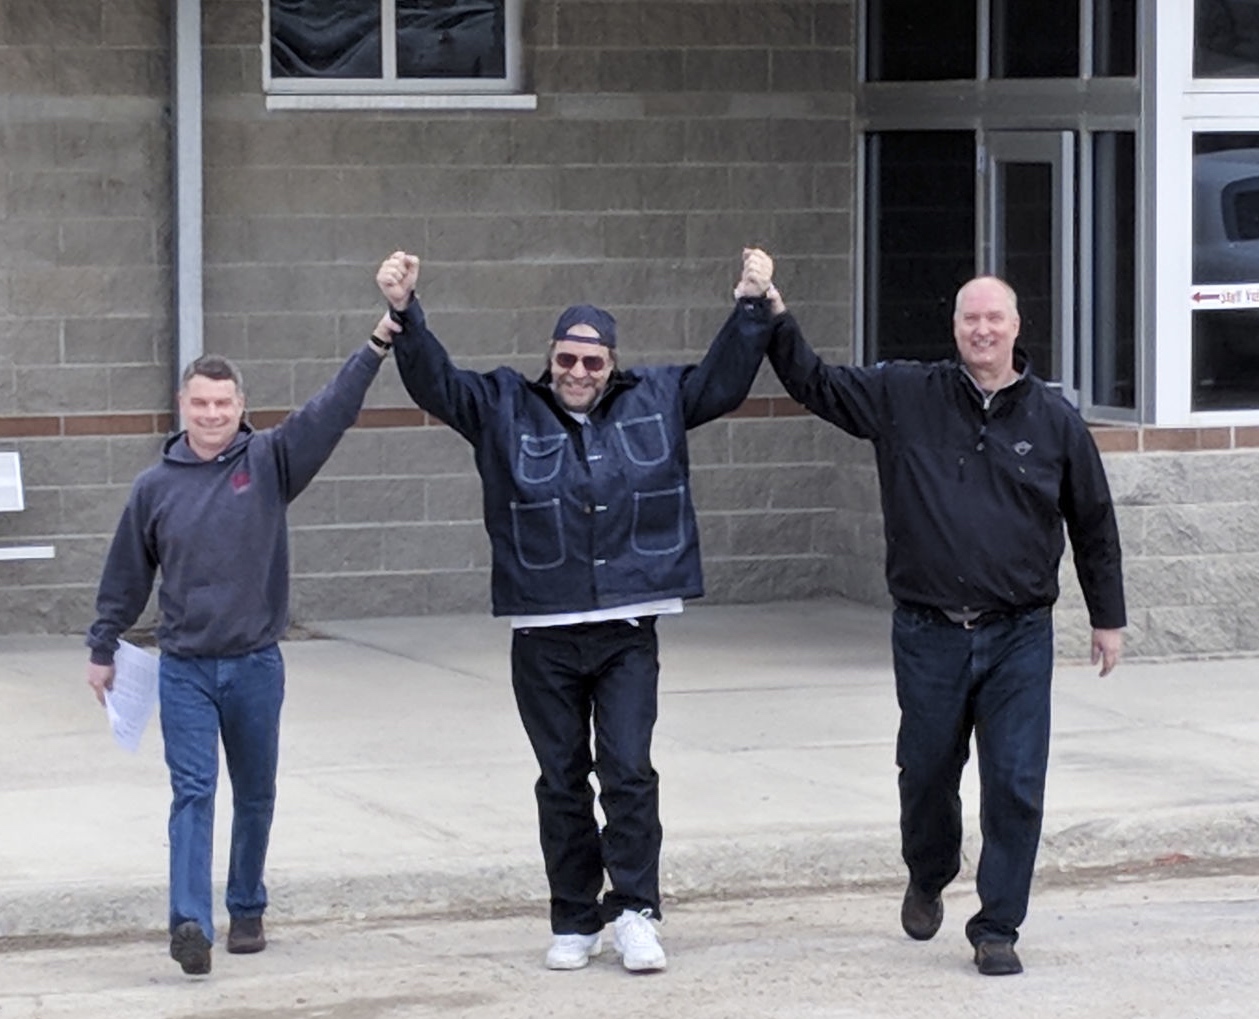 Freddie Joe Lawrence, center, walking out of Montana State Prison with his lawyers, Toby Cook, left, and Larry Mansch of the Montana Innocence Project. Photo by Thomas Plank.